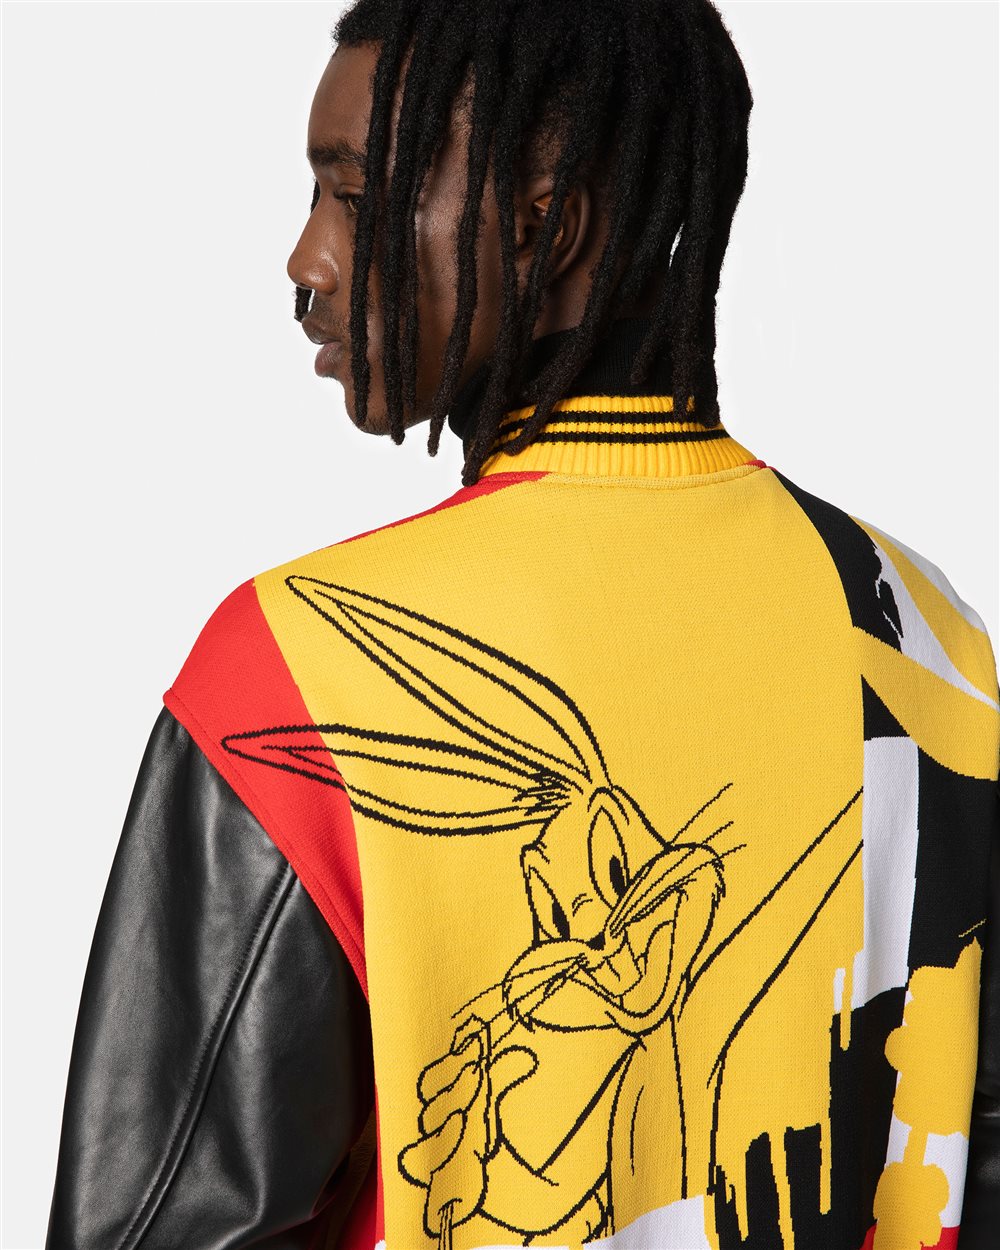 Bomber jacket with cartoon details and logo - Iceberg - Official Website